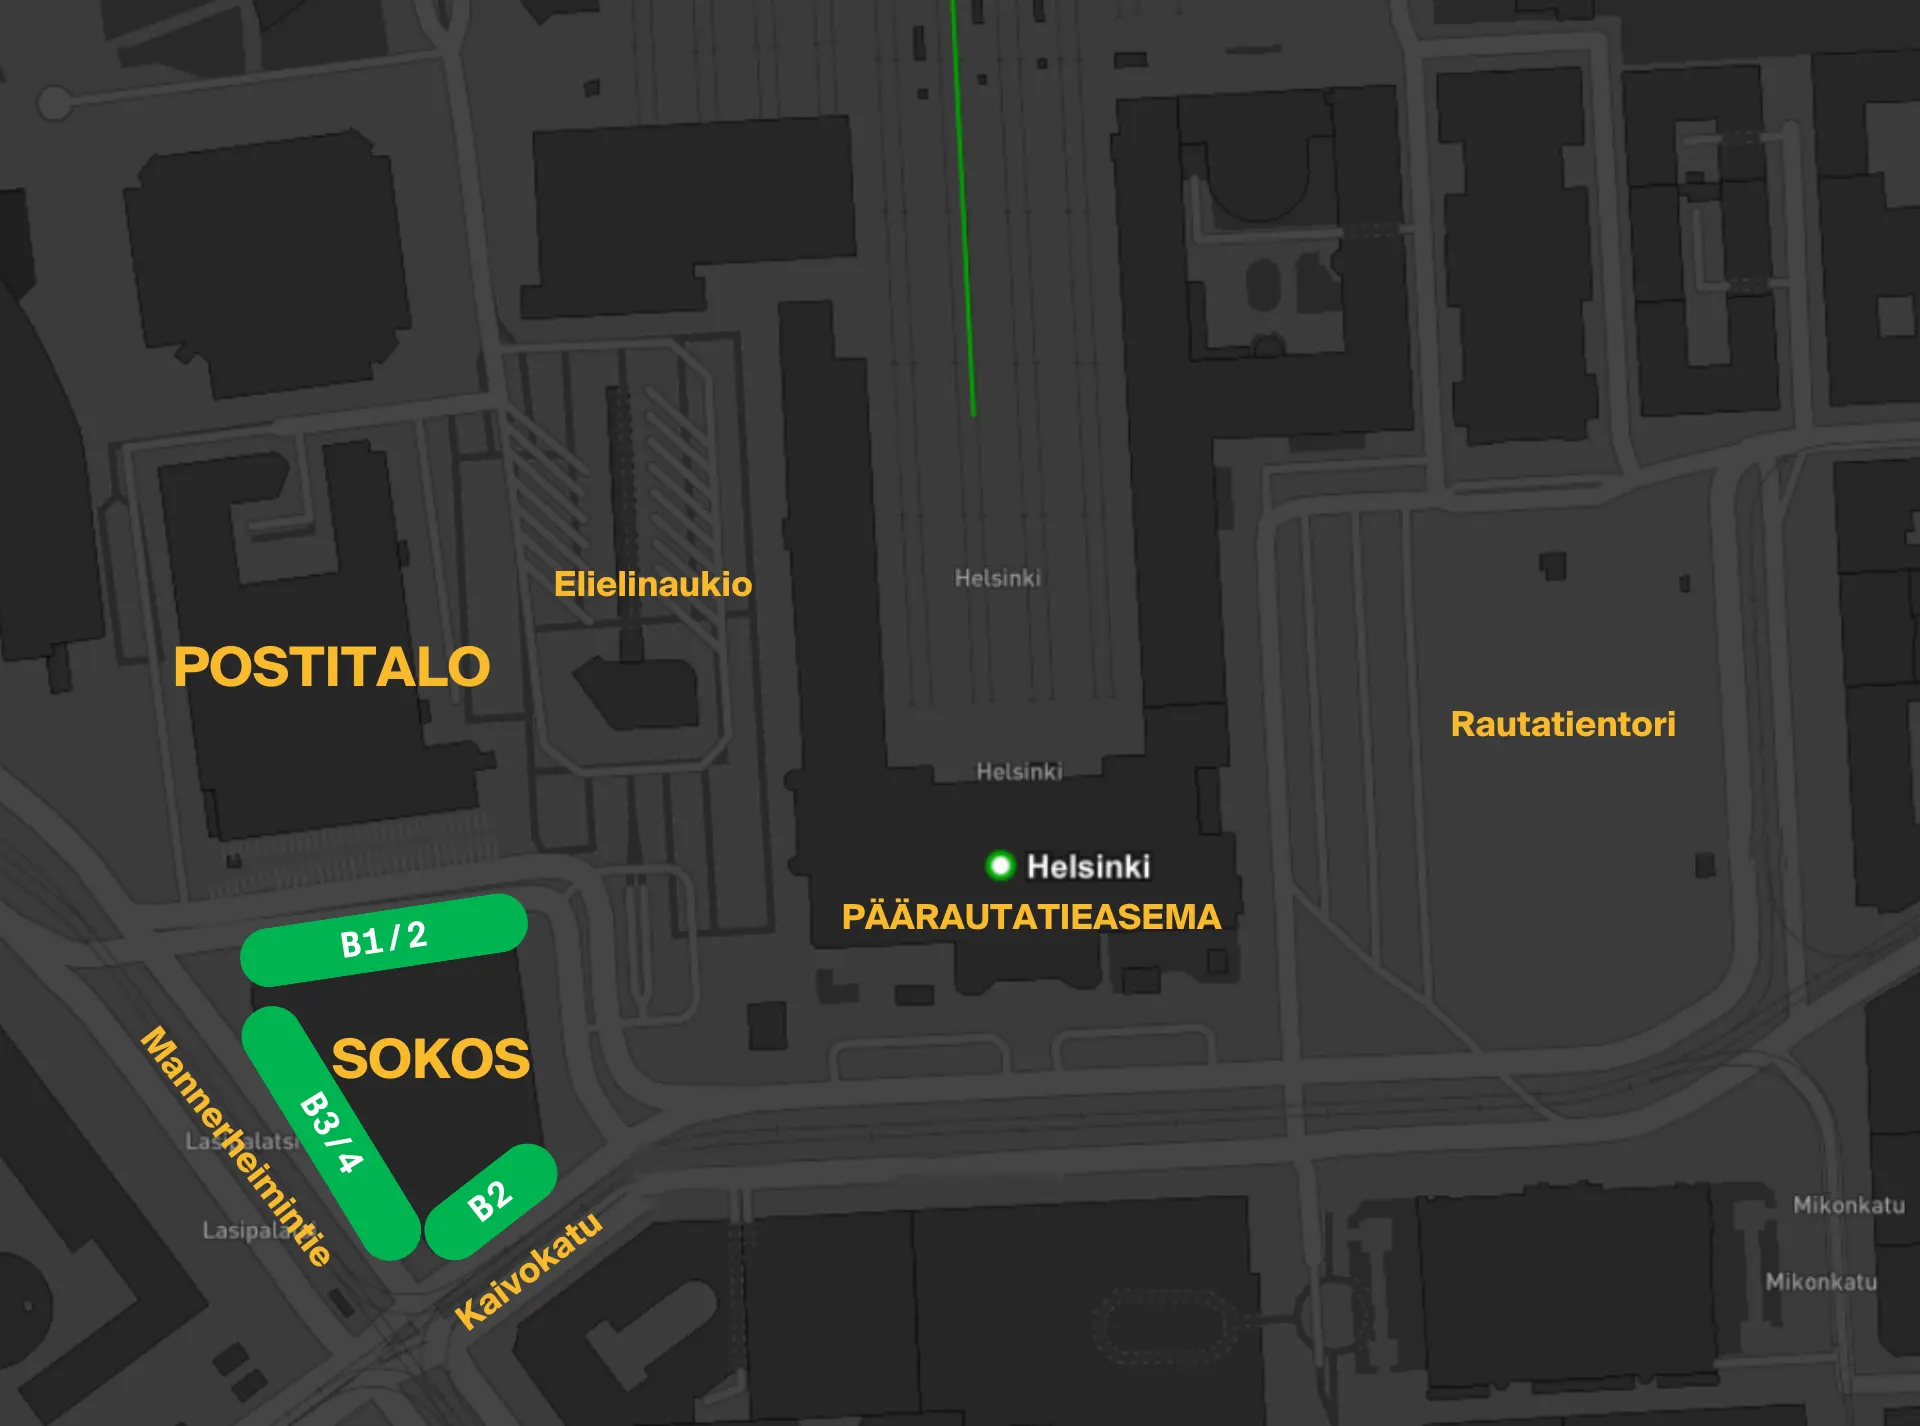 The buses on line B1 depart from Postikatu on the Sokos side.
The buses on line B2 depart from Kaivokatu on the Sokos side. 
The buses on lines B3 and B4 depart from Mannerheimintie on the Sokos side.
The scheduled buses of line B2 with outward times of 5:05, 10:05, 19:05 and 23:05 depart from the Postikatu stop, between Postitalo and Sokos, on the Sokos side. The other buses on line B2 depart from Kaivokatu according to the map.